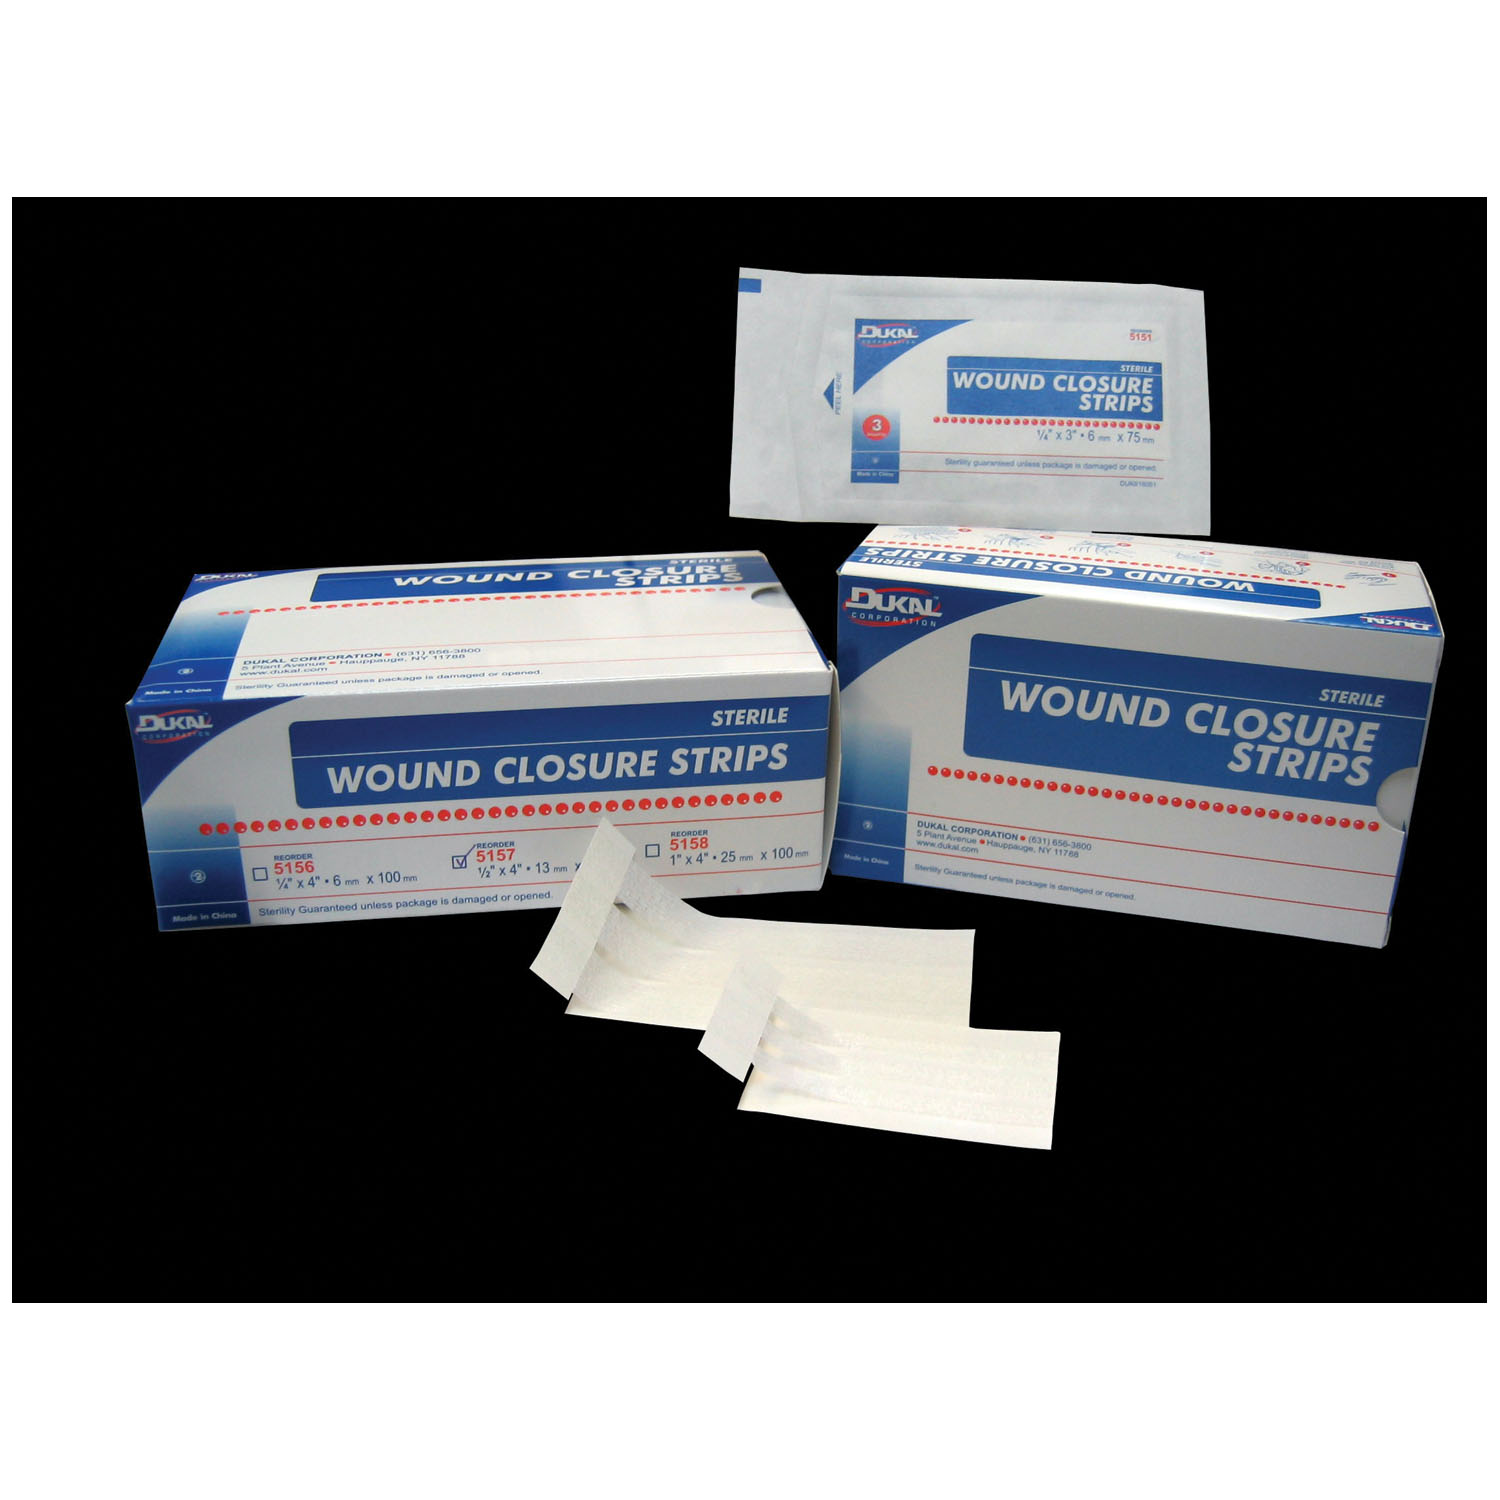 DUKAL WOUND CLOSURE STRIPS : 5151 CS $139.47 Stocked